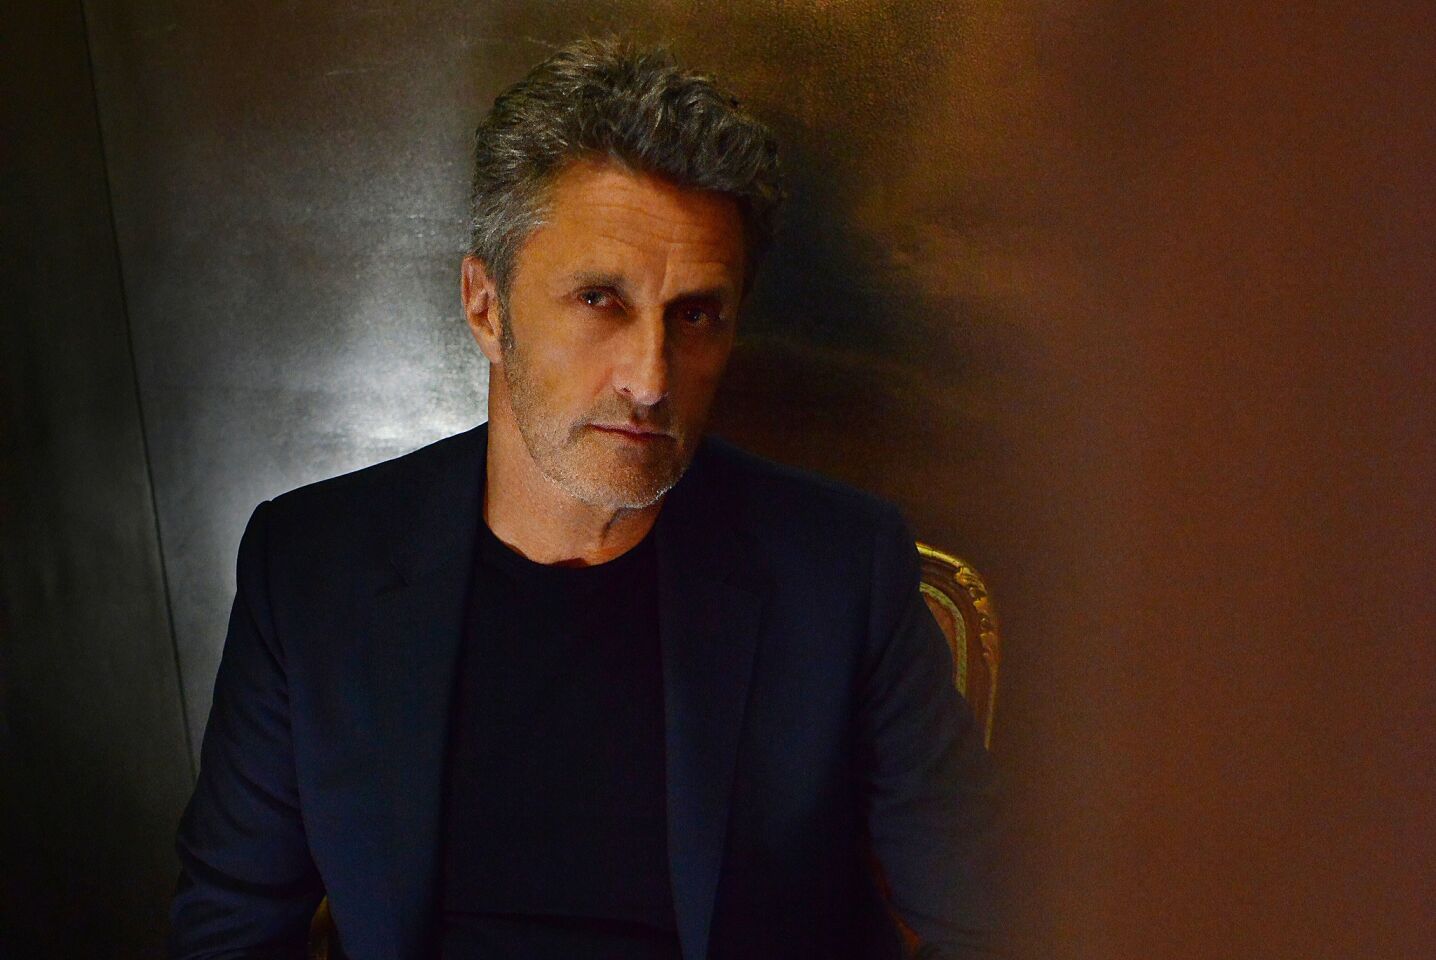 This is Pawlikowski's first Oscar nomination in the directing category, although his film "Ida" won the foreign-language film Oscar in 2016. "Cold War" earned him the director prize at the 2018 Cannes Film Festival.